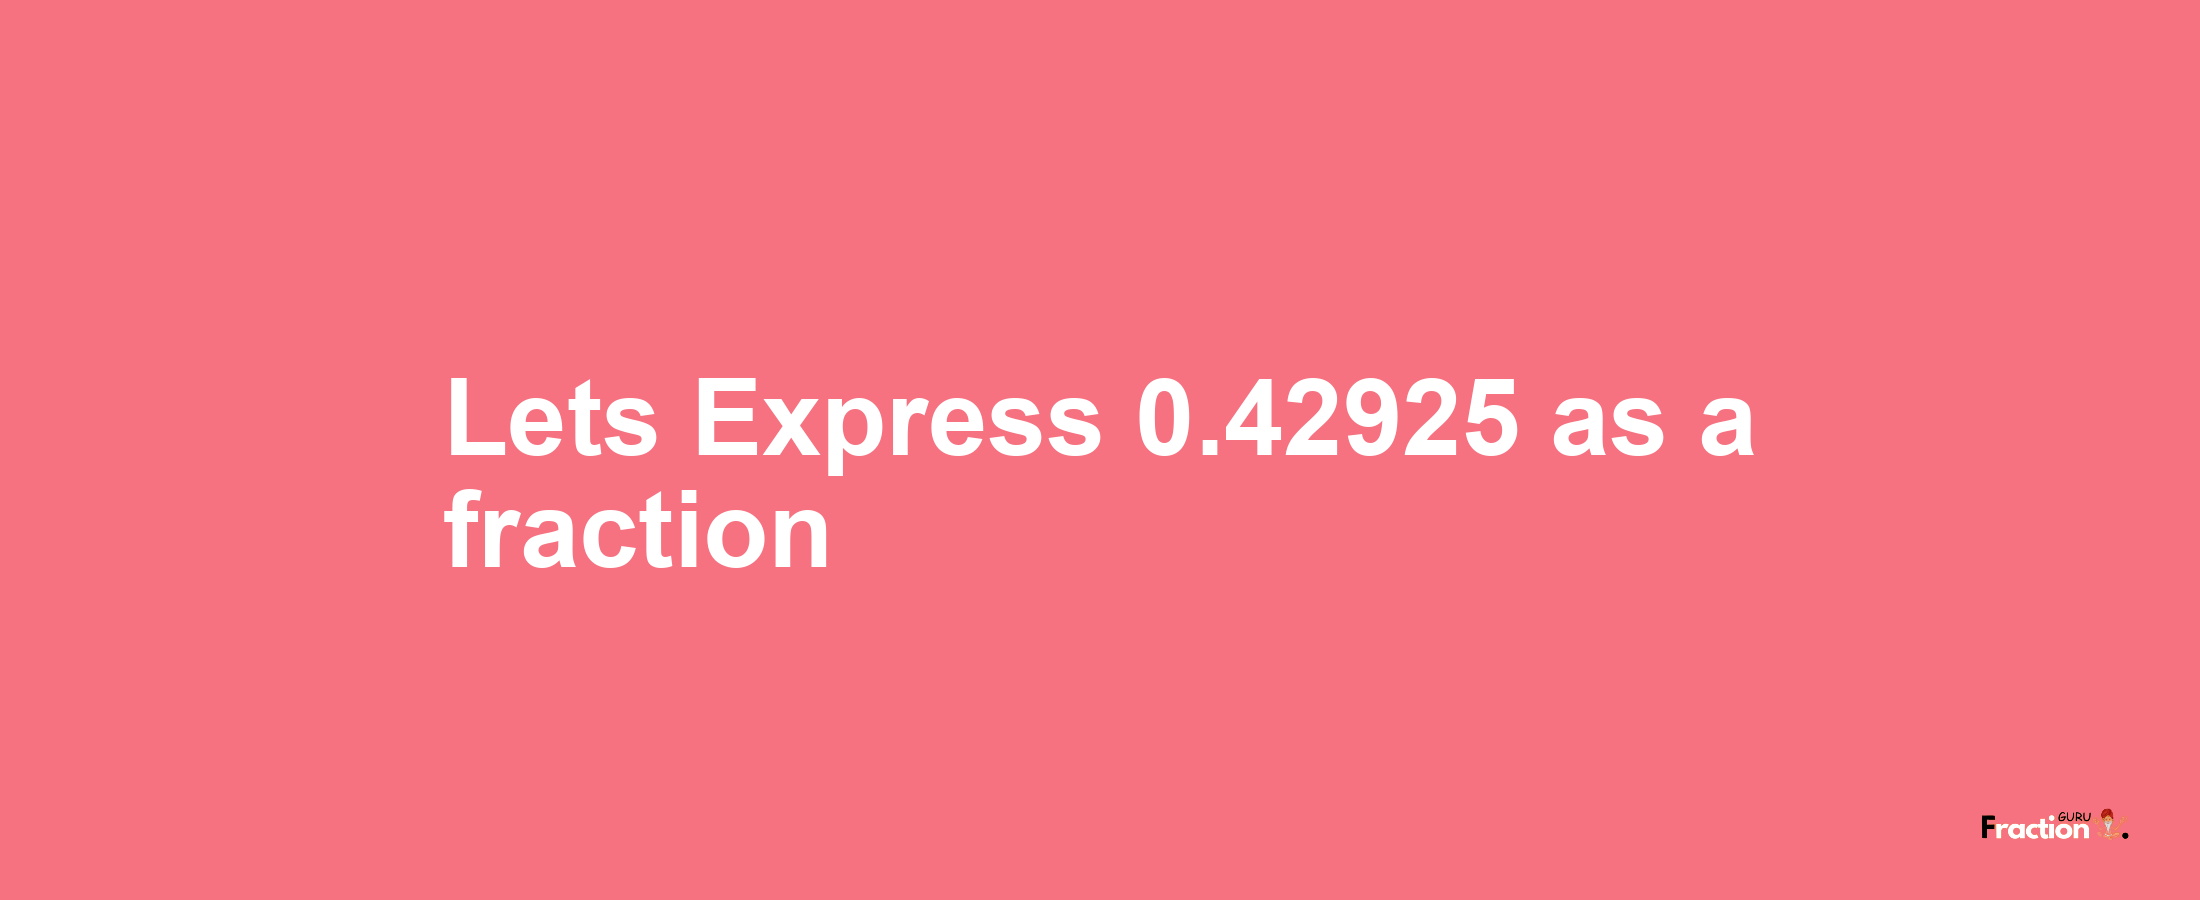 Lets Express 0.42925 as afraction